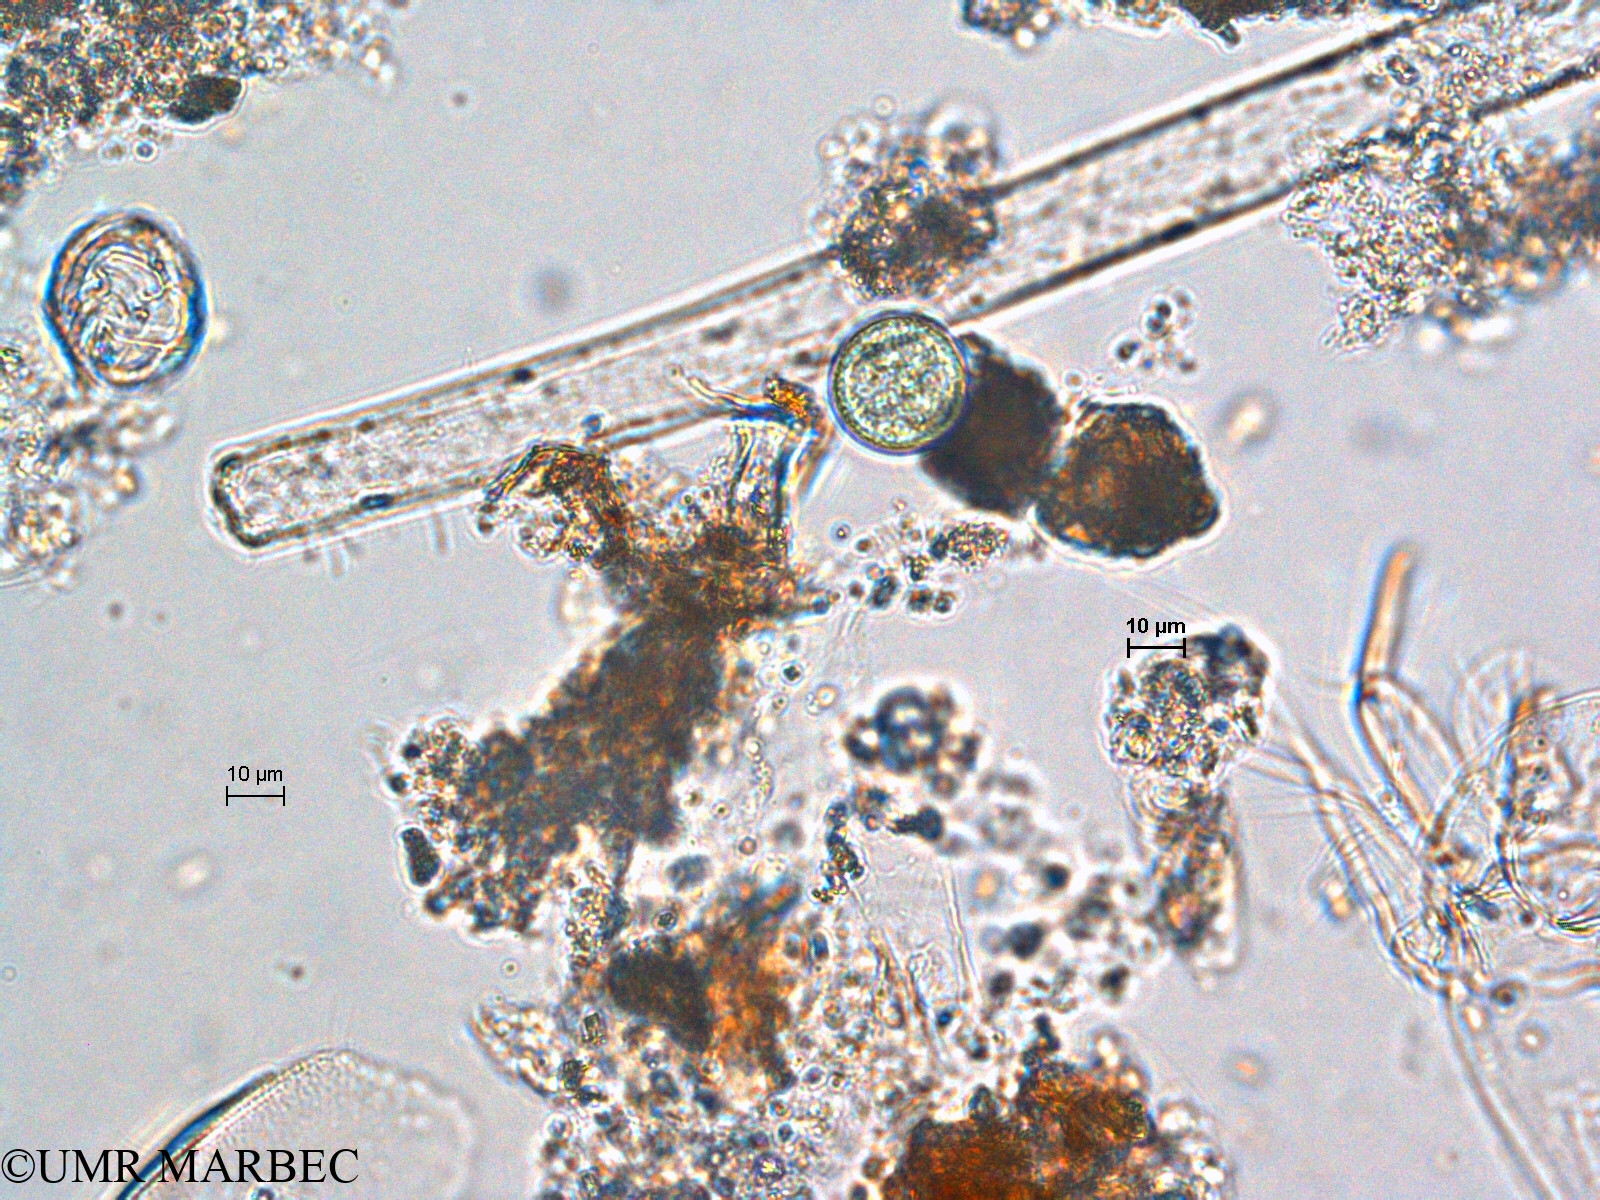 phyto/Scattered_Islands/europa/COMMA April 2011/Chroococcus turgidus (ancien C. sp8 -2)(copy).jpg